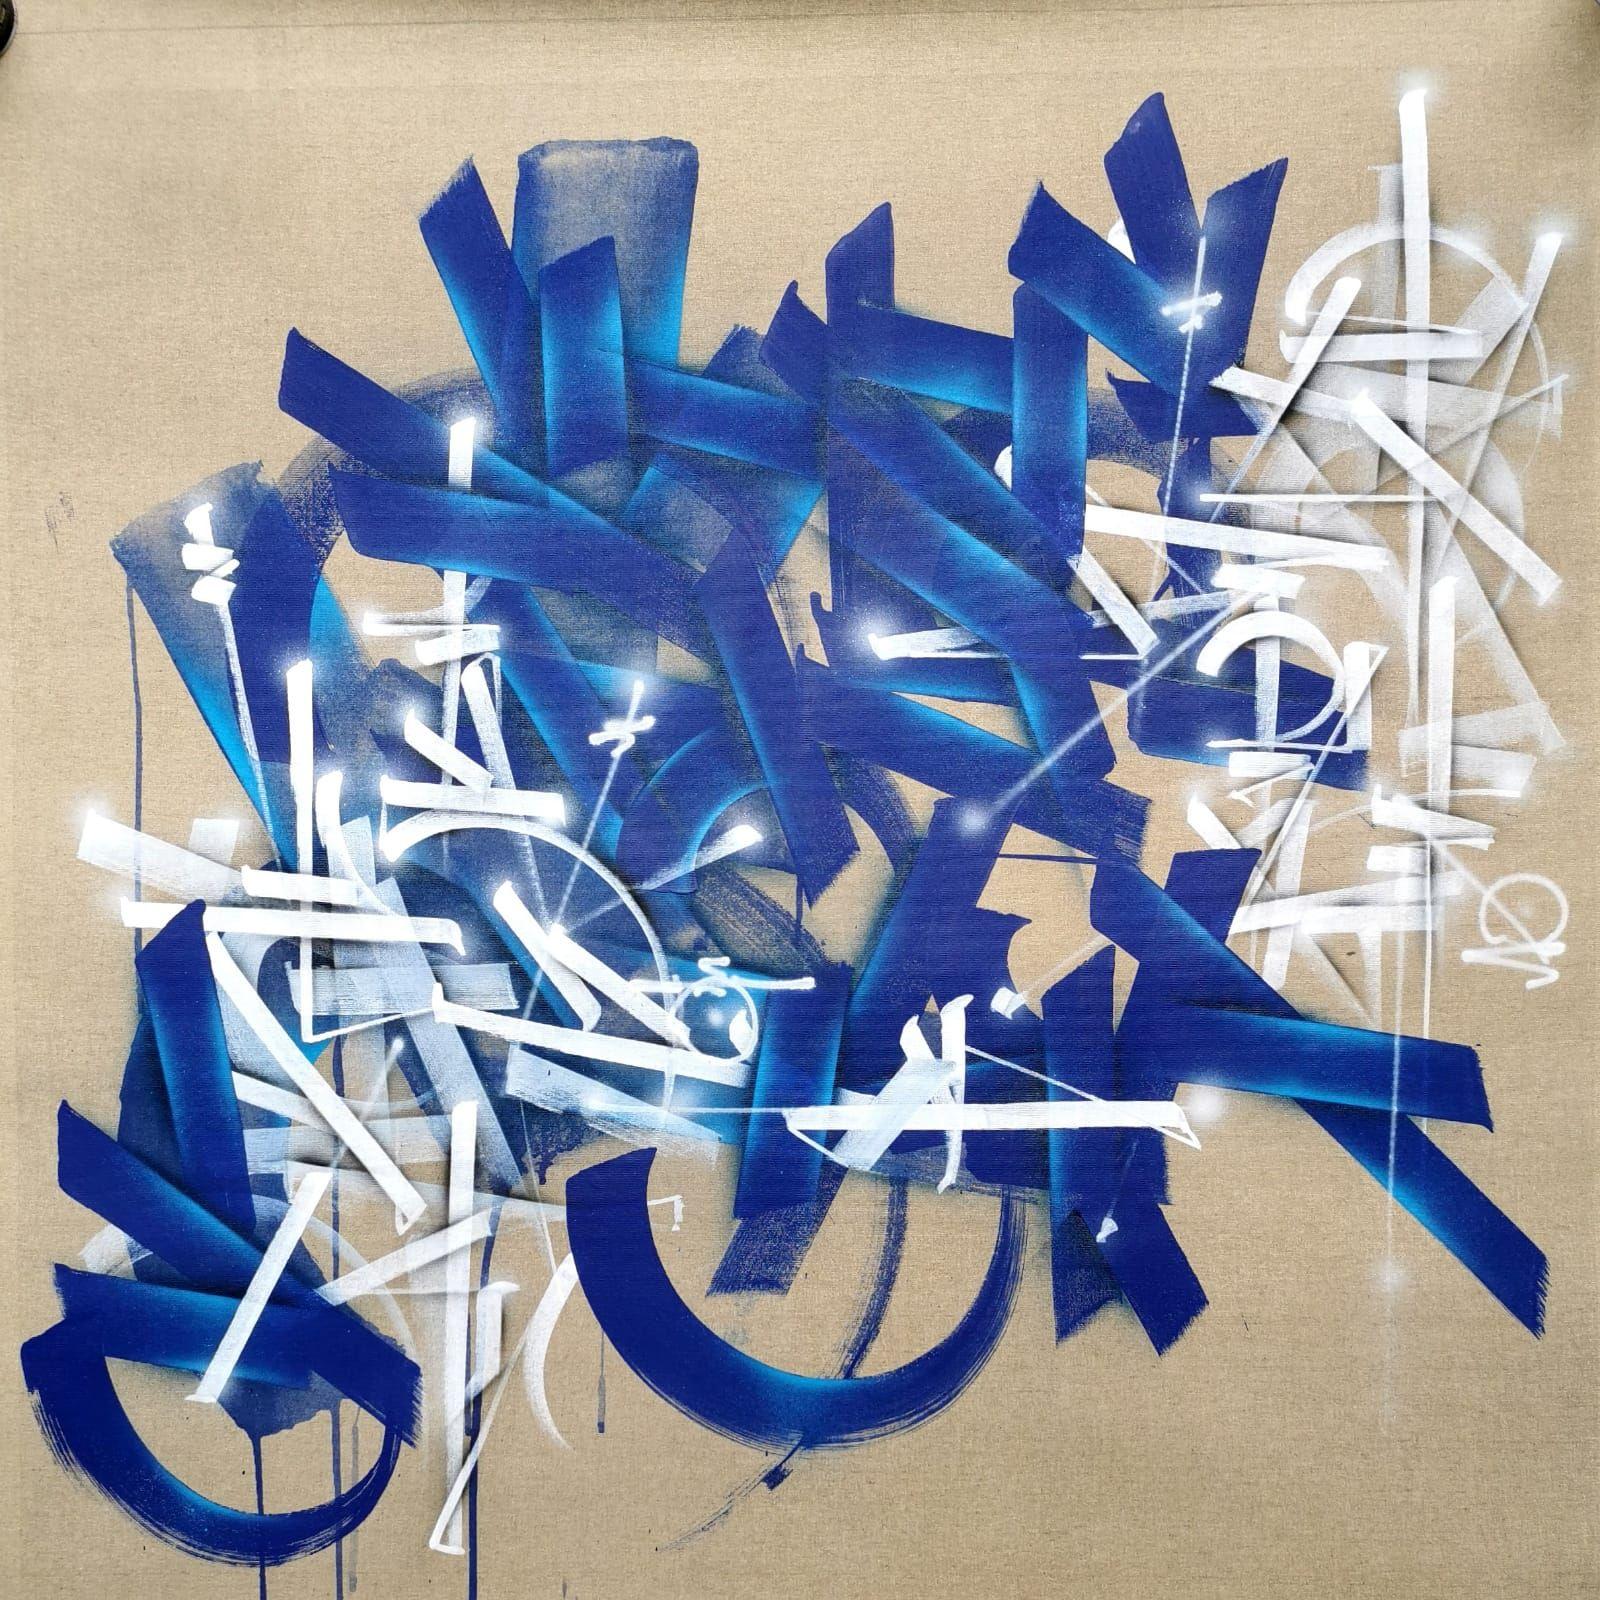 DMVT 0105, Abstract and Calligraphic art by French Street Artist SOKLAK